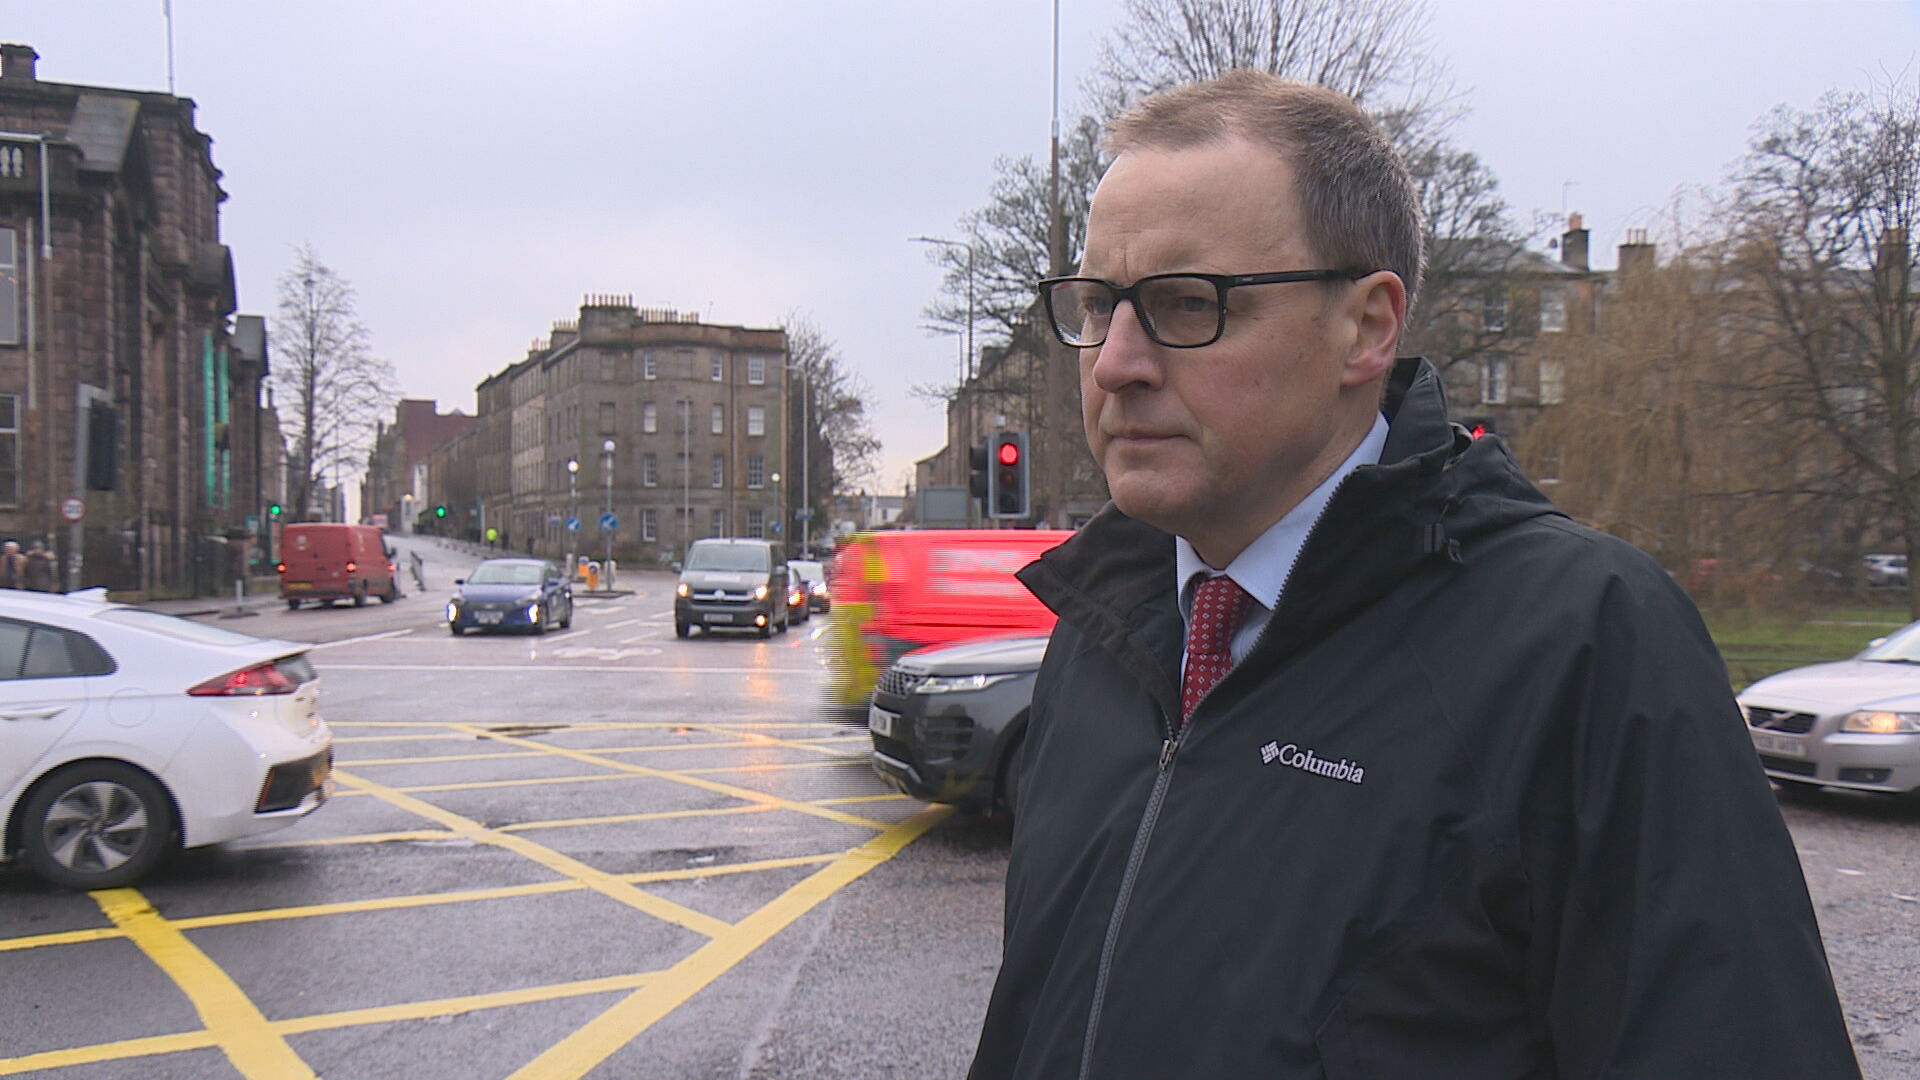 Council transport convener Scott Arthur said there's a 'long way to go' to meet air quality targets